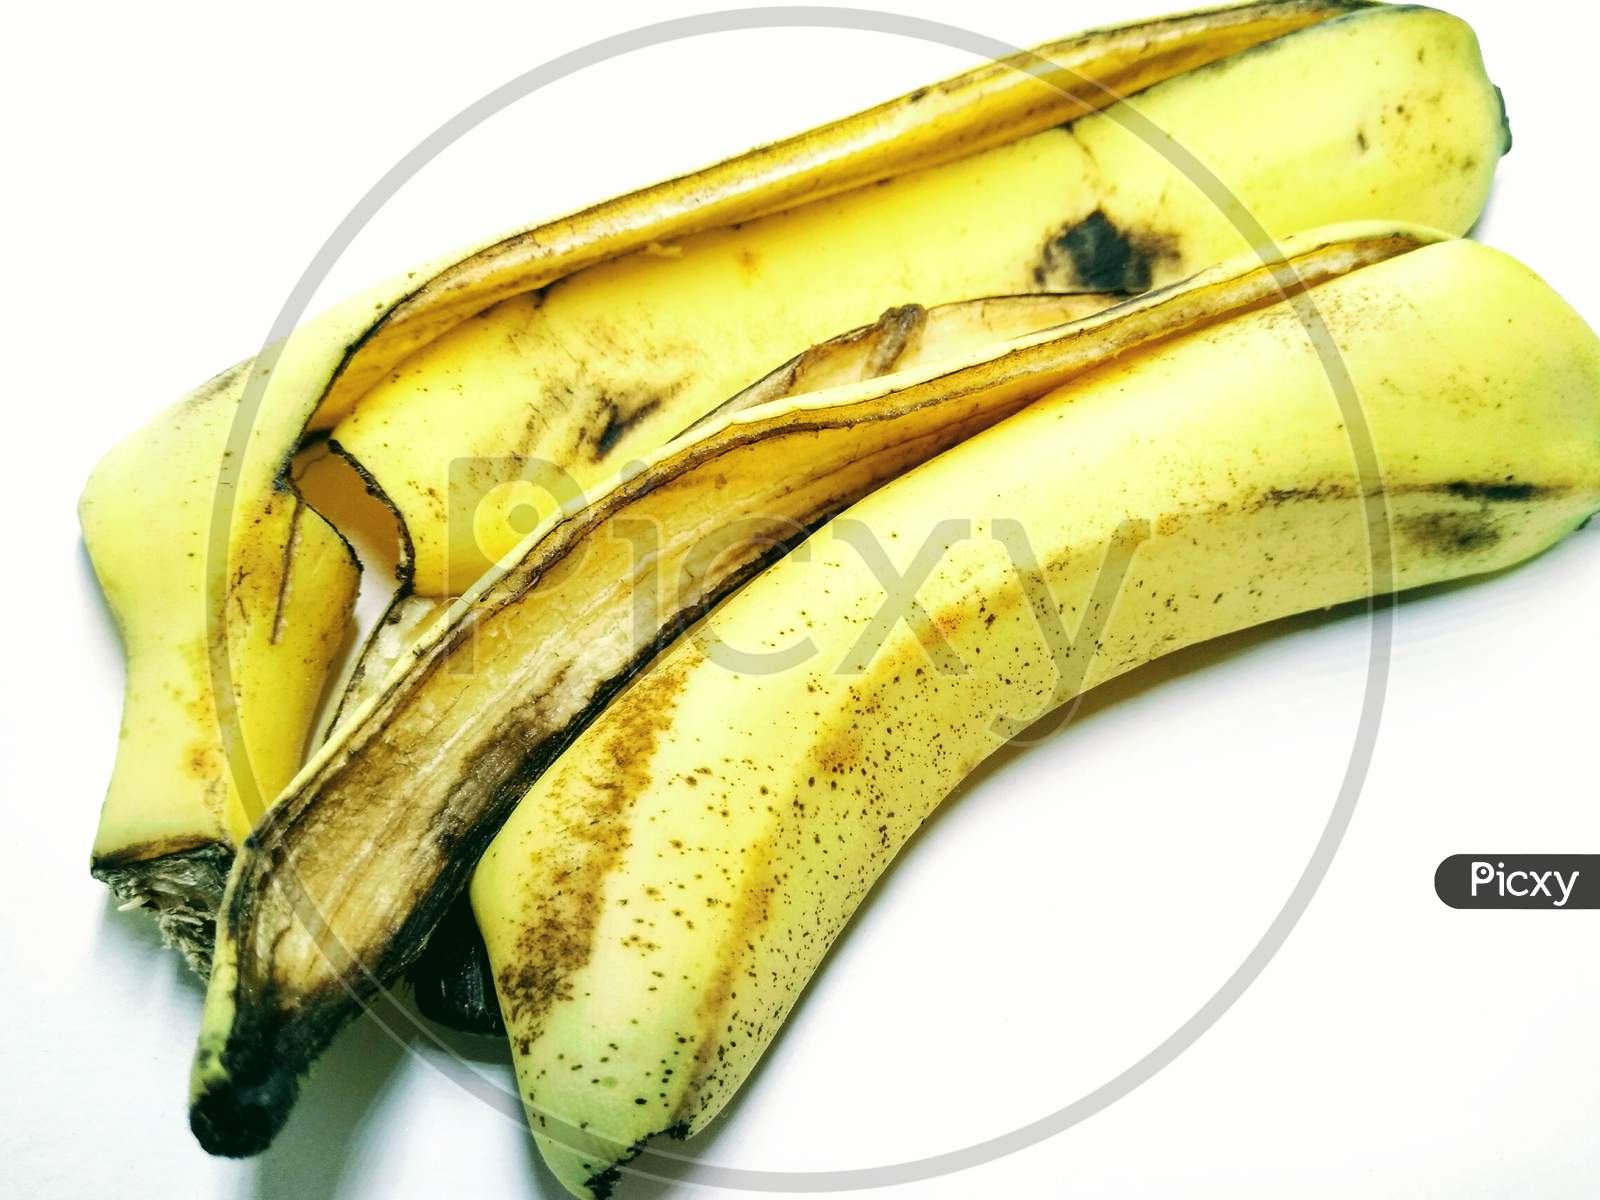 Banana Peel Over an Isolated White Background